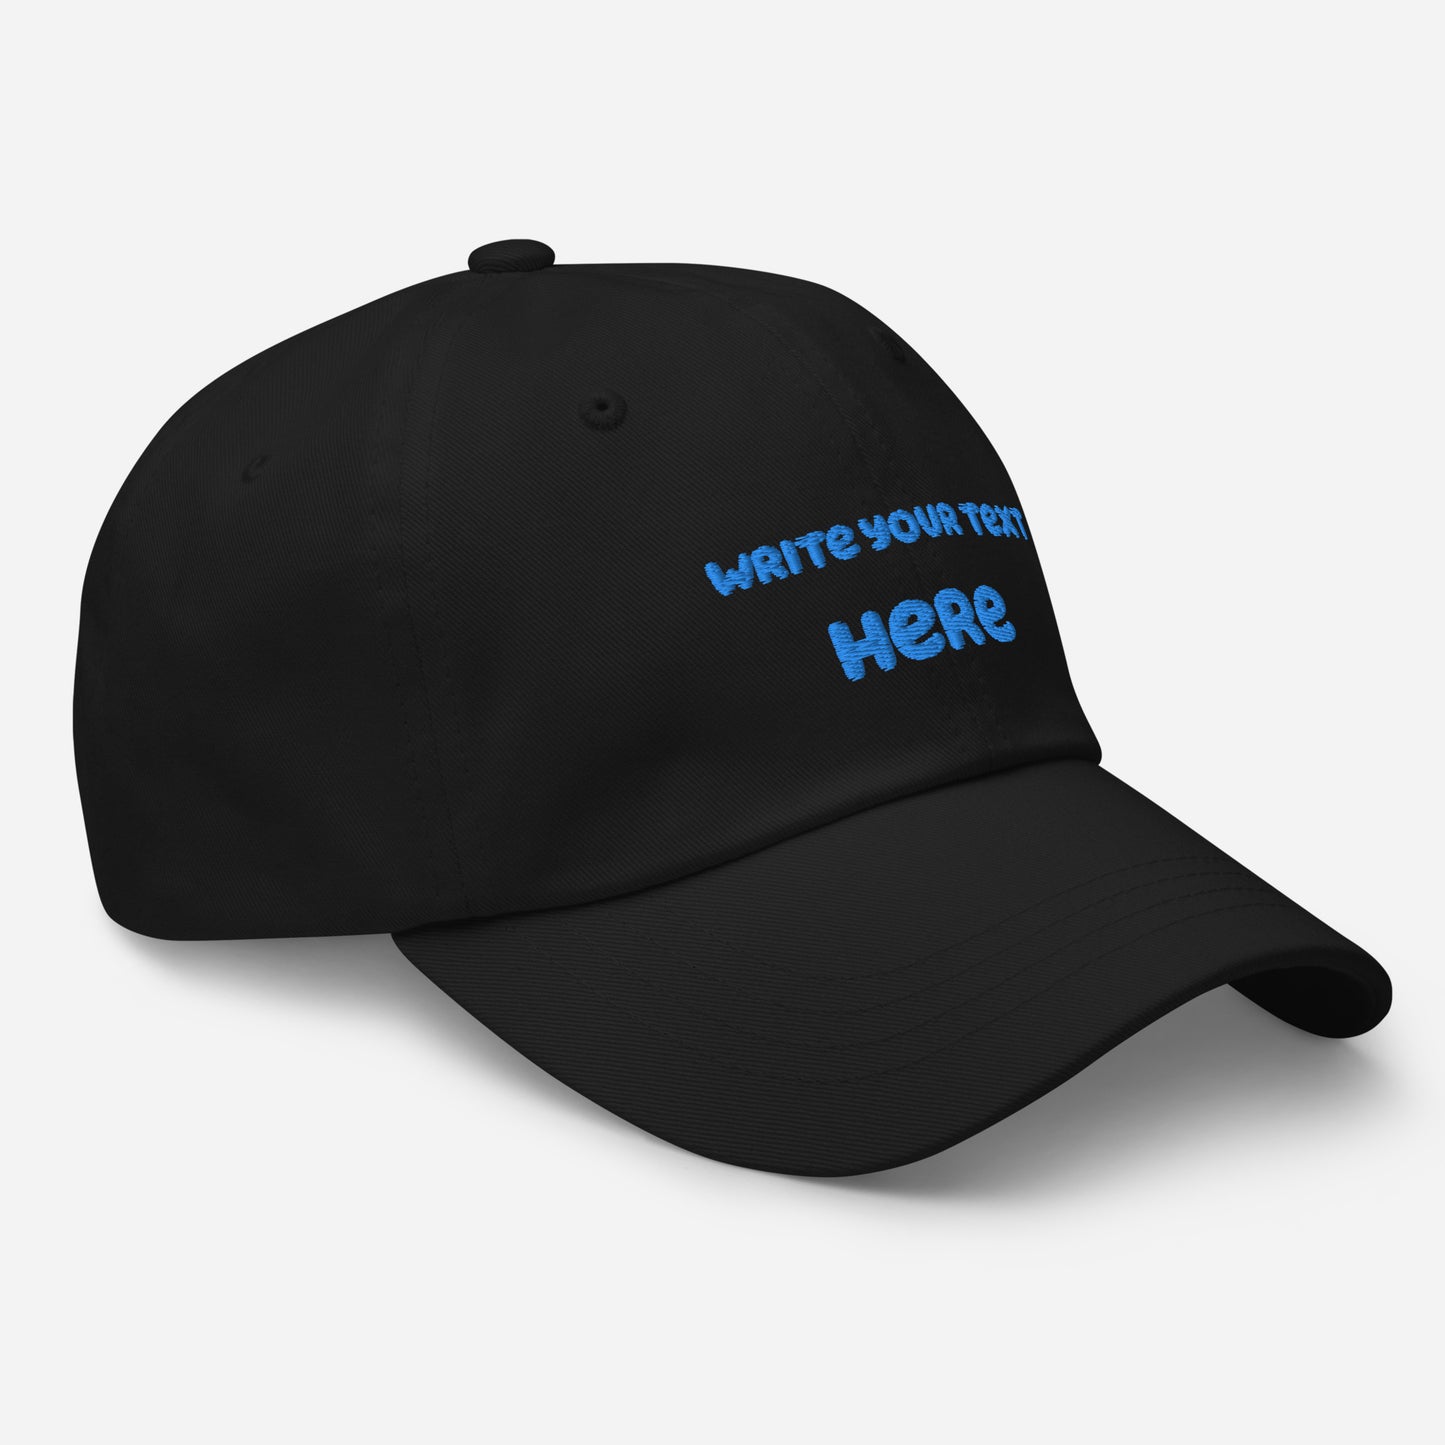 Personalized Dad hat - Write your statement